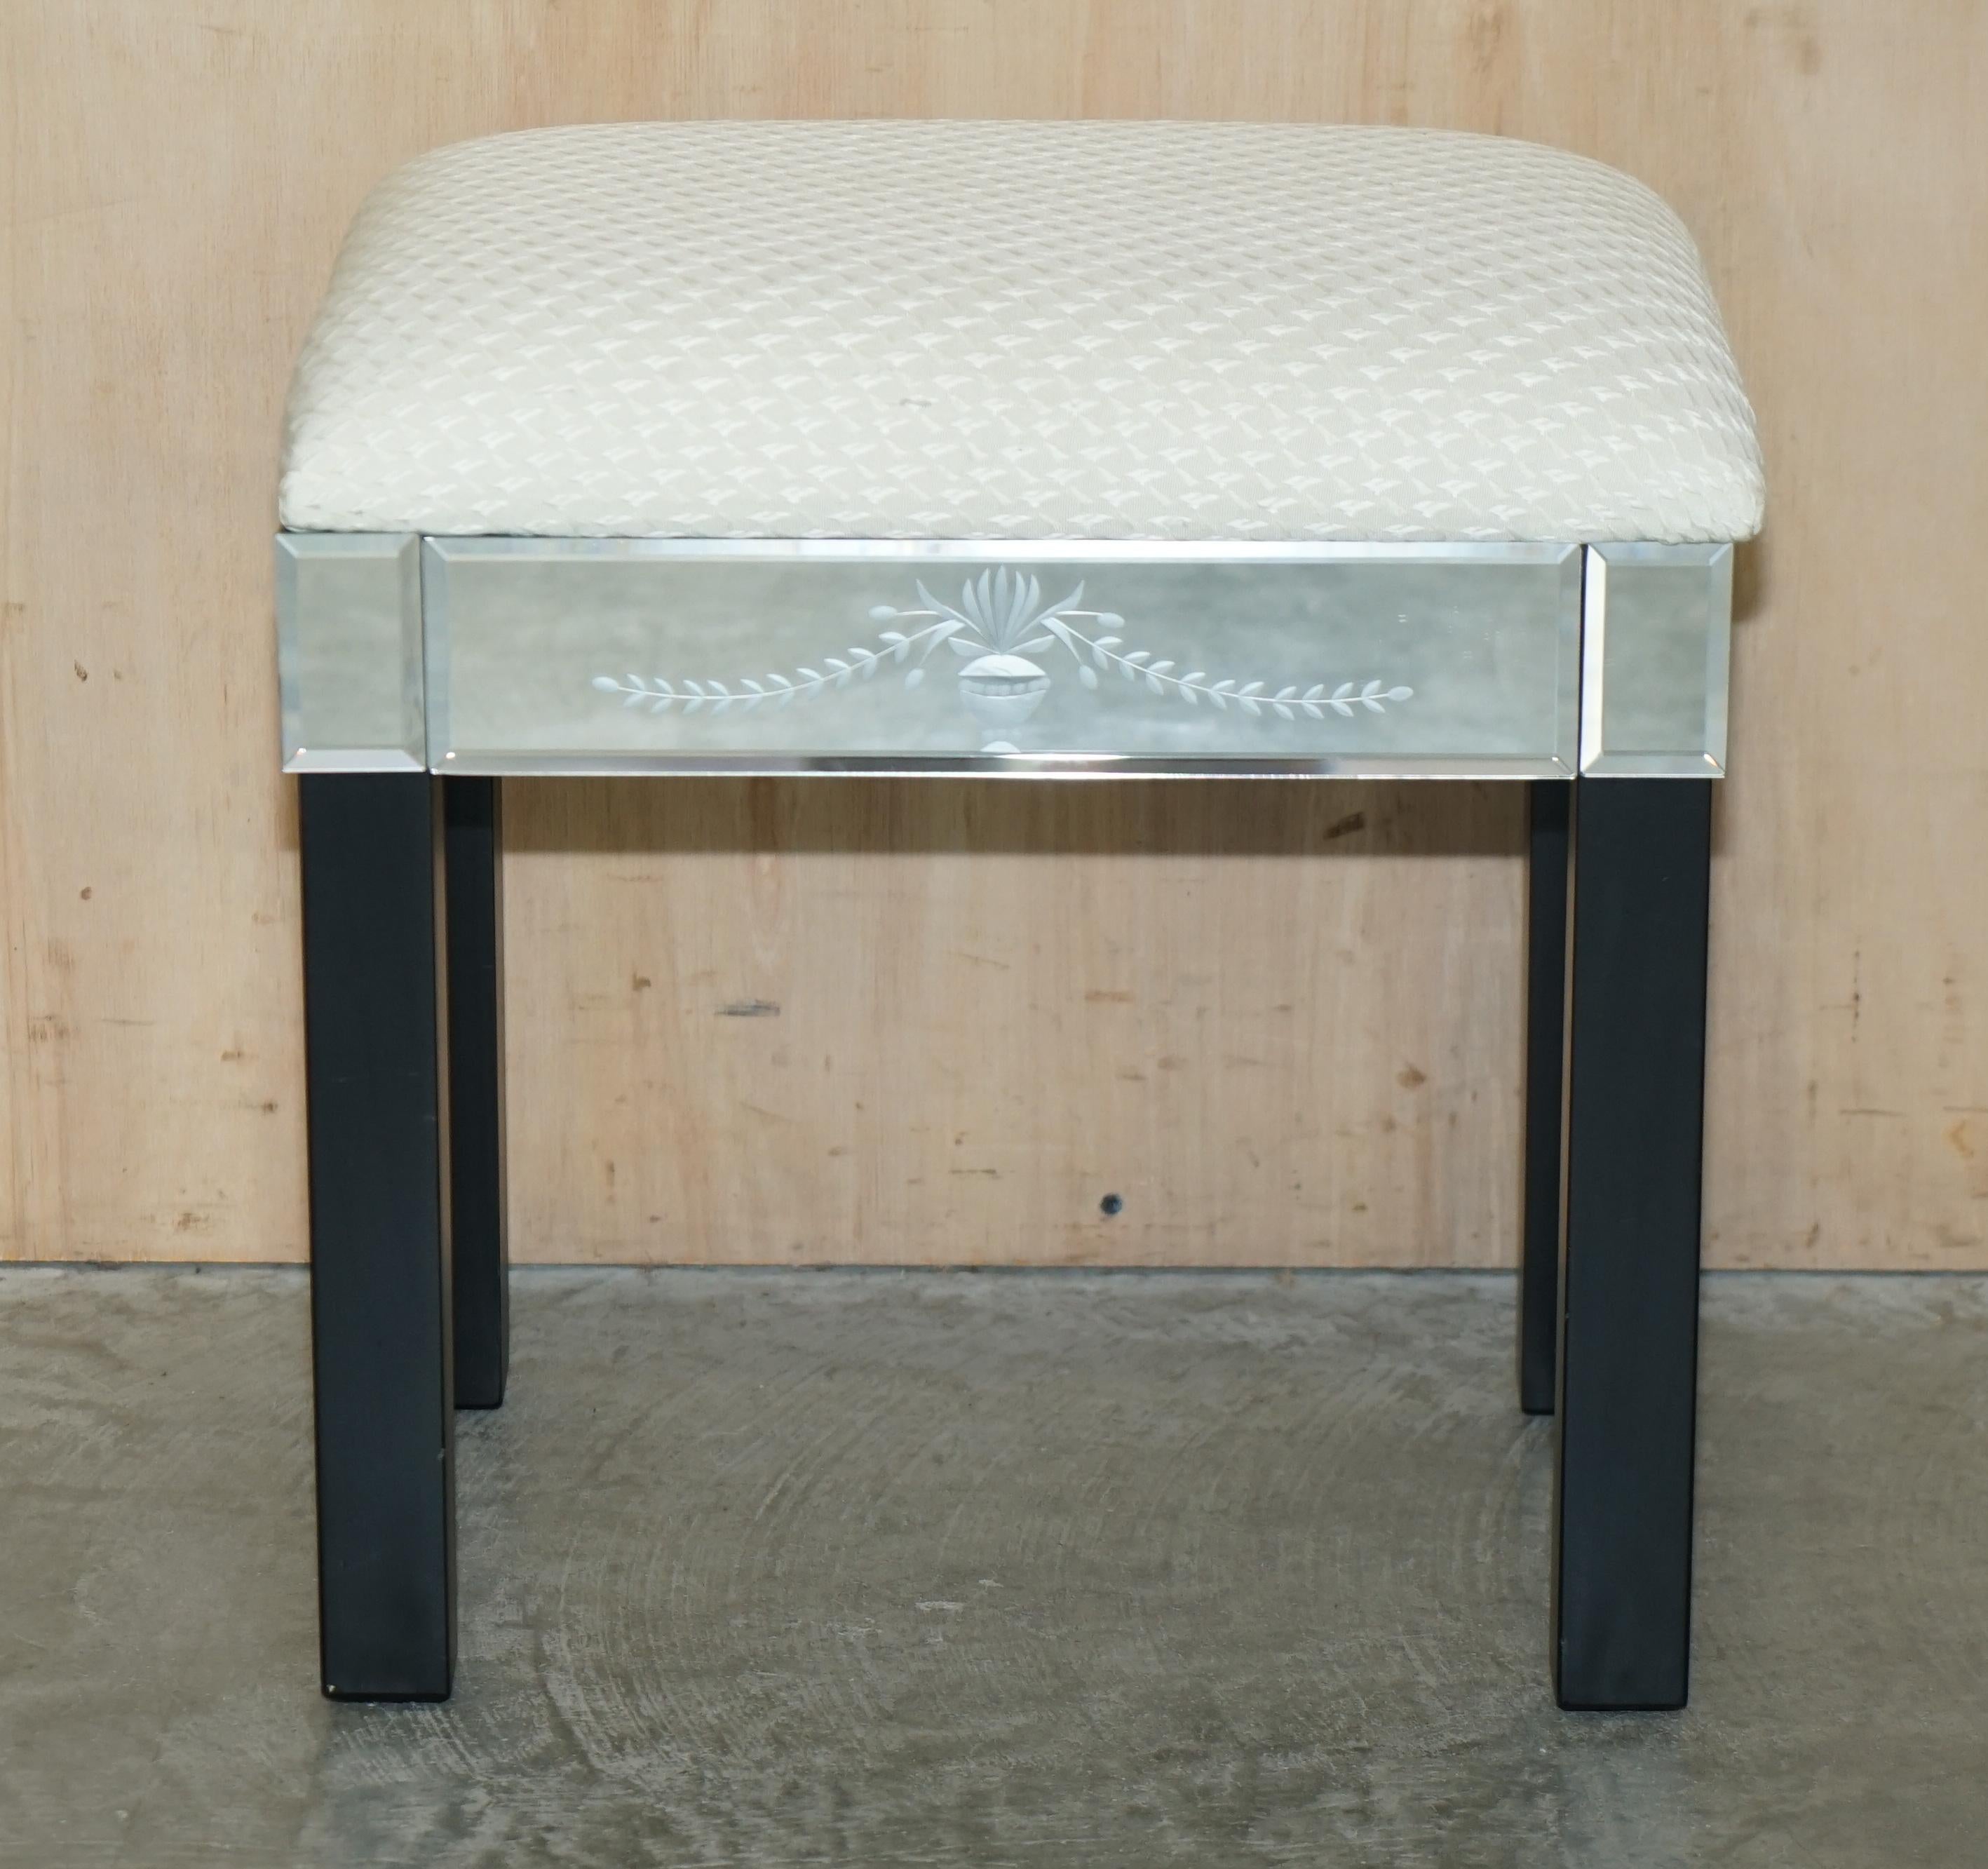 We are delighted to offer for sale this lovely vintage Italian Venetian style etched glass dressing table stool which is part of a suite

This stool is part of a suite as mentioned, I have in total a console table, a round side table, a small